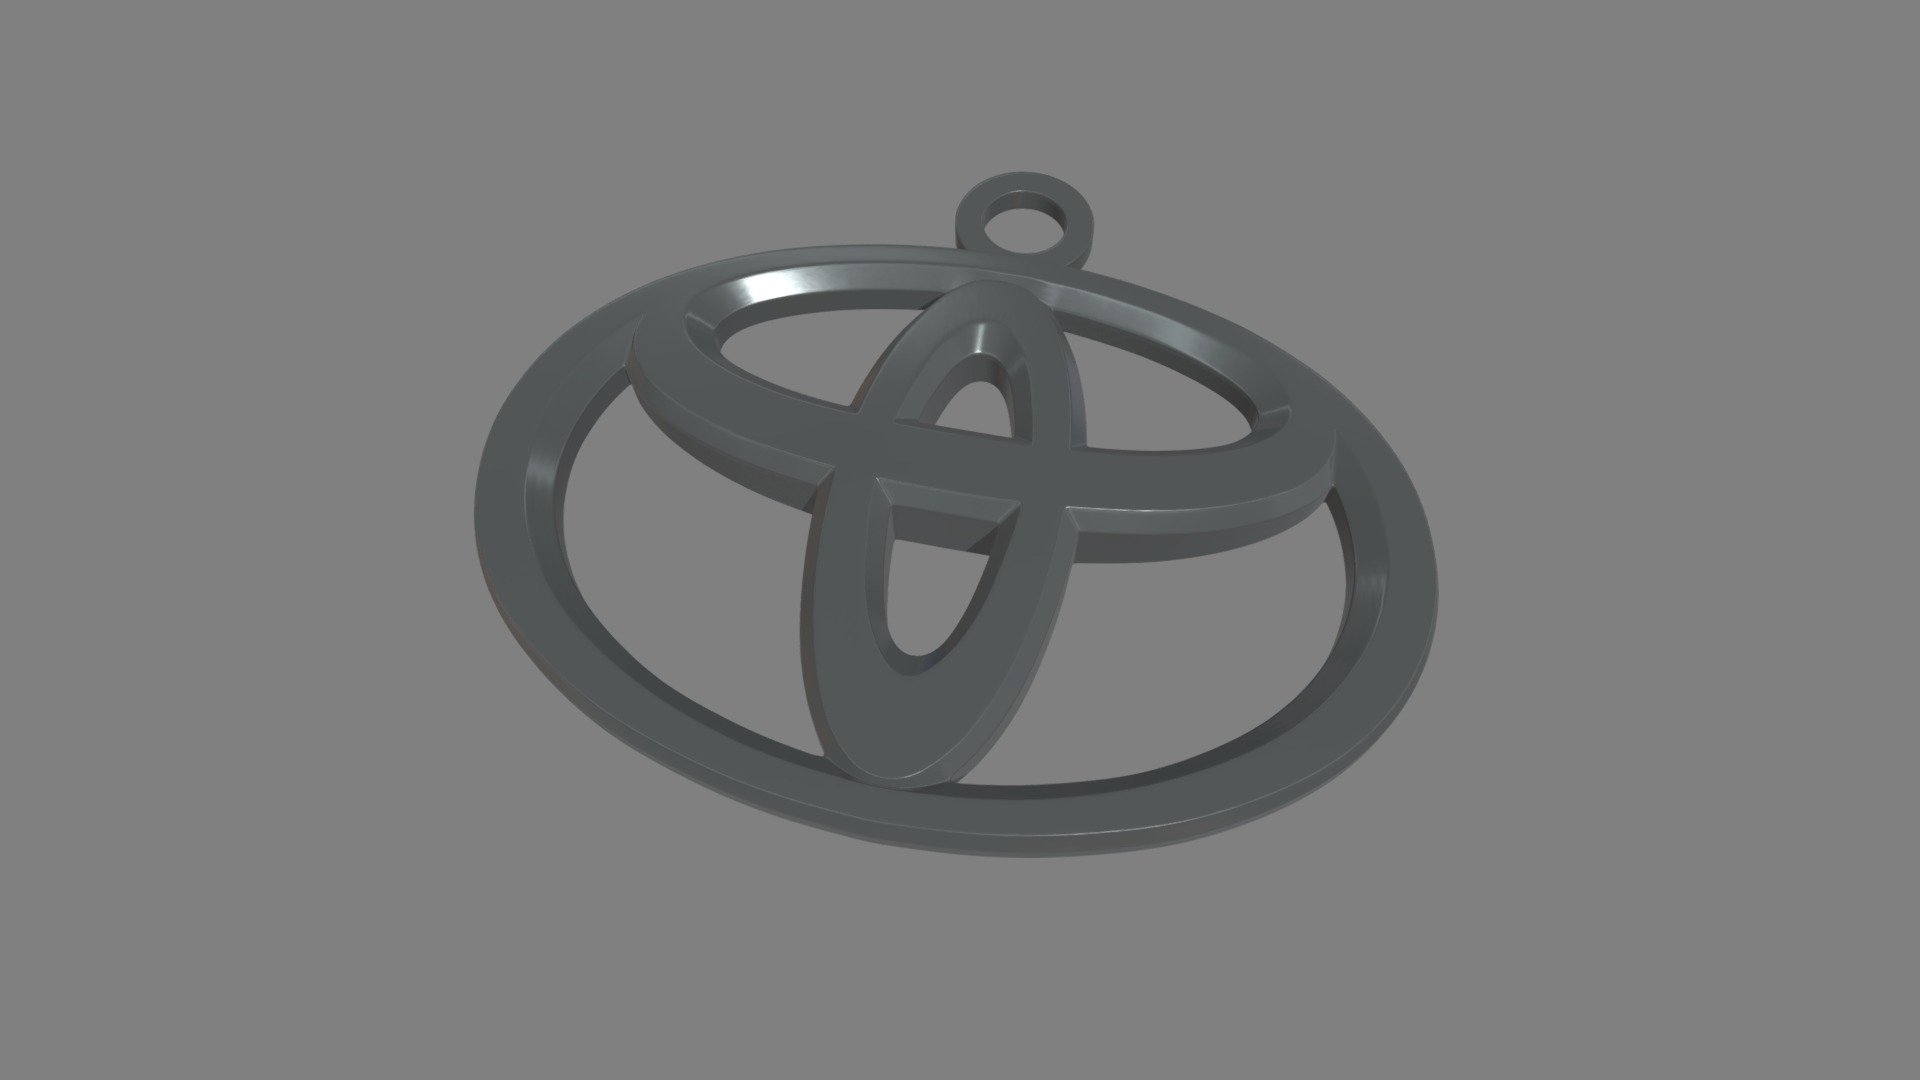 This model contains a Toyota Key Ring Chain based on a logo modeled in Maya 2018.

The model is ready as one unique part and ready for being a great CGI model and also a 3D printable model.

This model is one of a great collection of Key Rings i published in my profile, which are available for buying as packs or each individual ones.

If you need any kind of help contact me, i will help you with everything i can. If you like the model please give me some feedback, I would appreciate it.

Don’t doubt on contacting me, i would be very happy to help. If you experience any kind of difficulties, be sure to contact me and i will help you. Sincerely Yours, ViperJr3D - Toyota Key Ring Chain - Buy Royalty Free 3D model by ViperJr3D 3d model